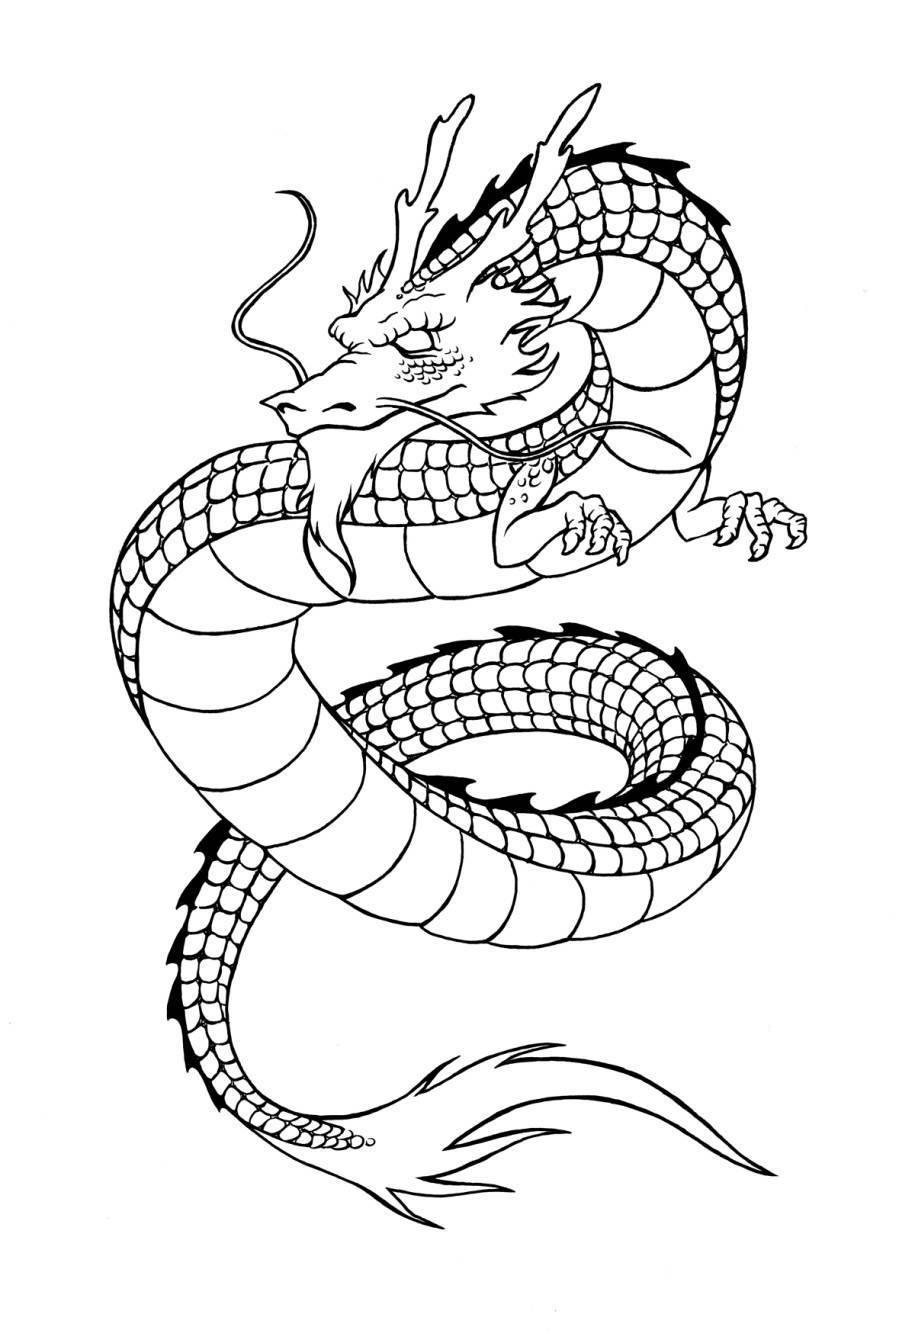 Dragon Coloring Pages for Adults - Best Coloring Pages For ...